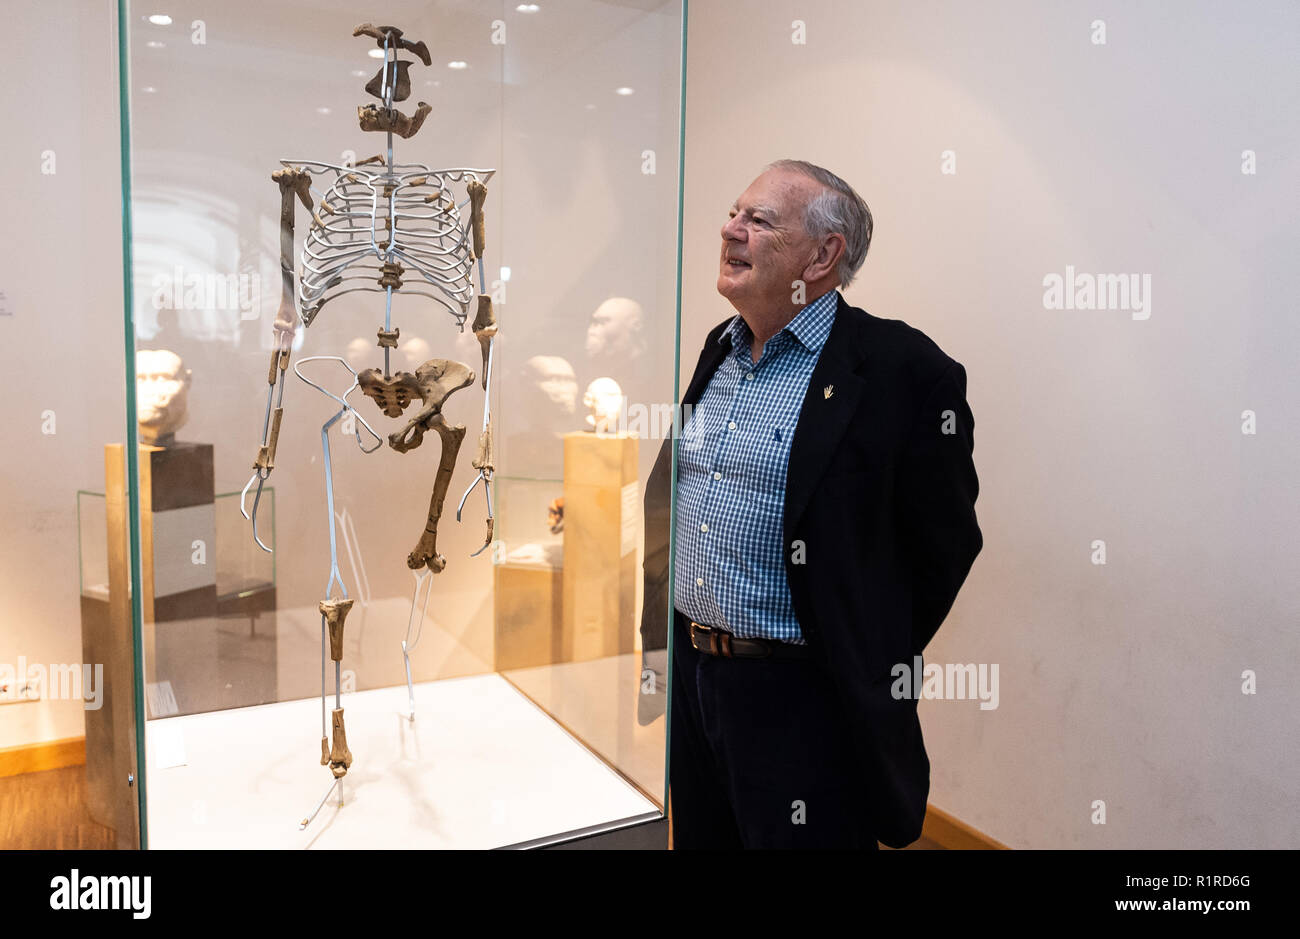 14 November 2018, Hessen, Frankfurt/Main: The American paleoanthropologist and discoverer of the 'Lucy' skeleton, Donald C. Johanson, stands next to a replica of the 'Lucy' skeleton in the Senckenberg Museum. The paleoanthropologist discovered the Australopithecus afarensis skeletal remains 44 years ago in Ethiopia. The skeleton 'Lucy' was long regarded as the oldest evidence of the upright gait of our ancestors. Photo: Silas Stein/dpa Stock Photo